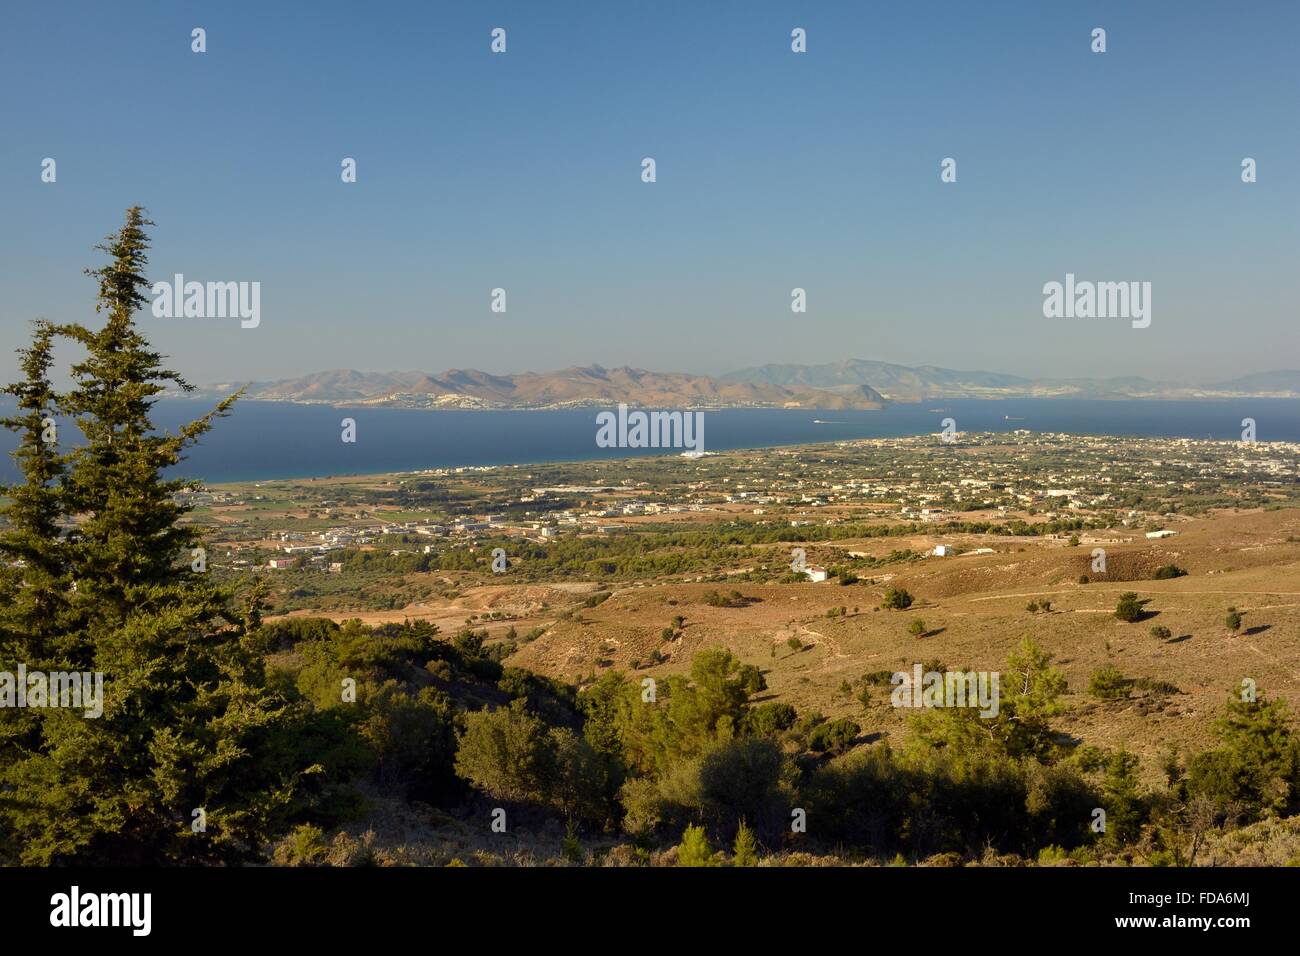 Overview of the north coast of Kos near Kos town with Turkey less than five miles away across the Aegean. Stock Photo